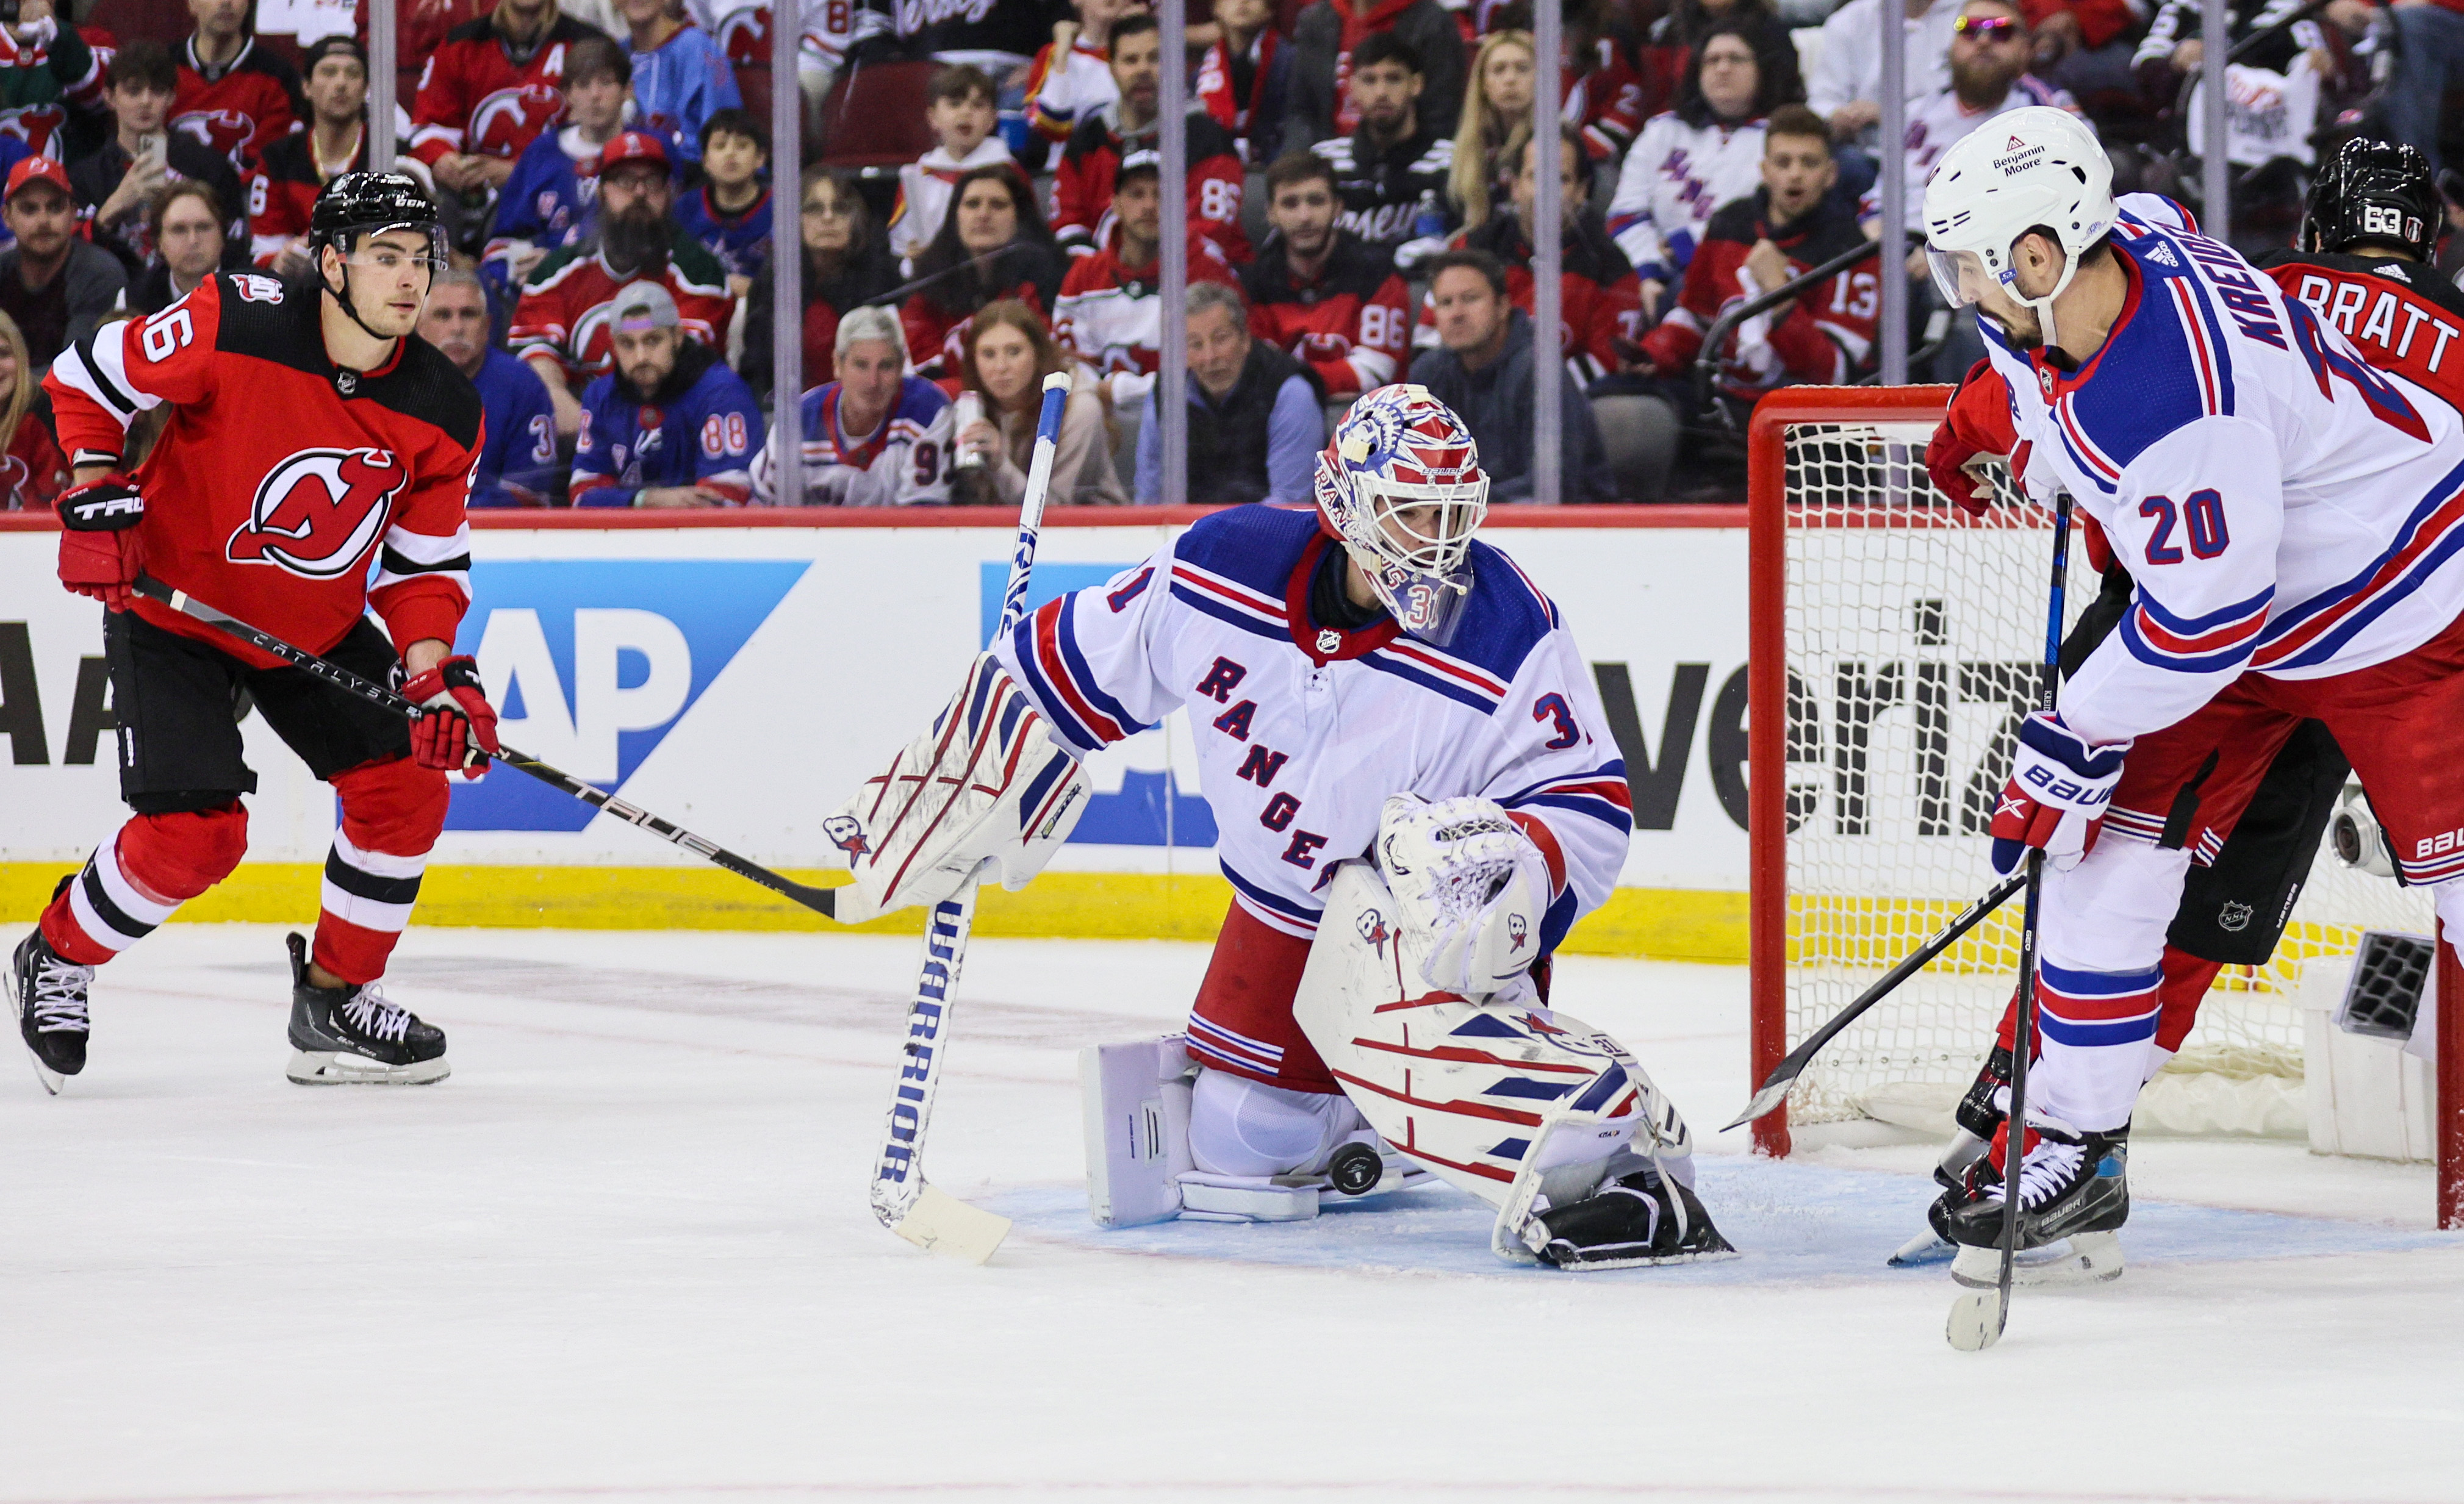 The puck bounces between the legs of New York Rangers goaltender Igor Shesterkin (31) as New Jersey Devils right wing Timo Meier (96, left) looks for a rebound during the first period on Tuesday, April 18, 2023 in Newark, N.J. The Rangers won, 5-1.